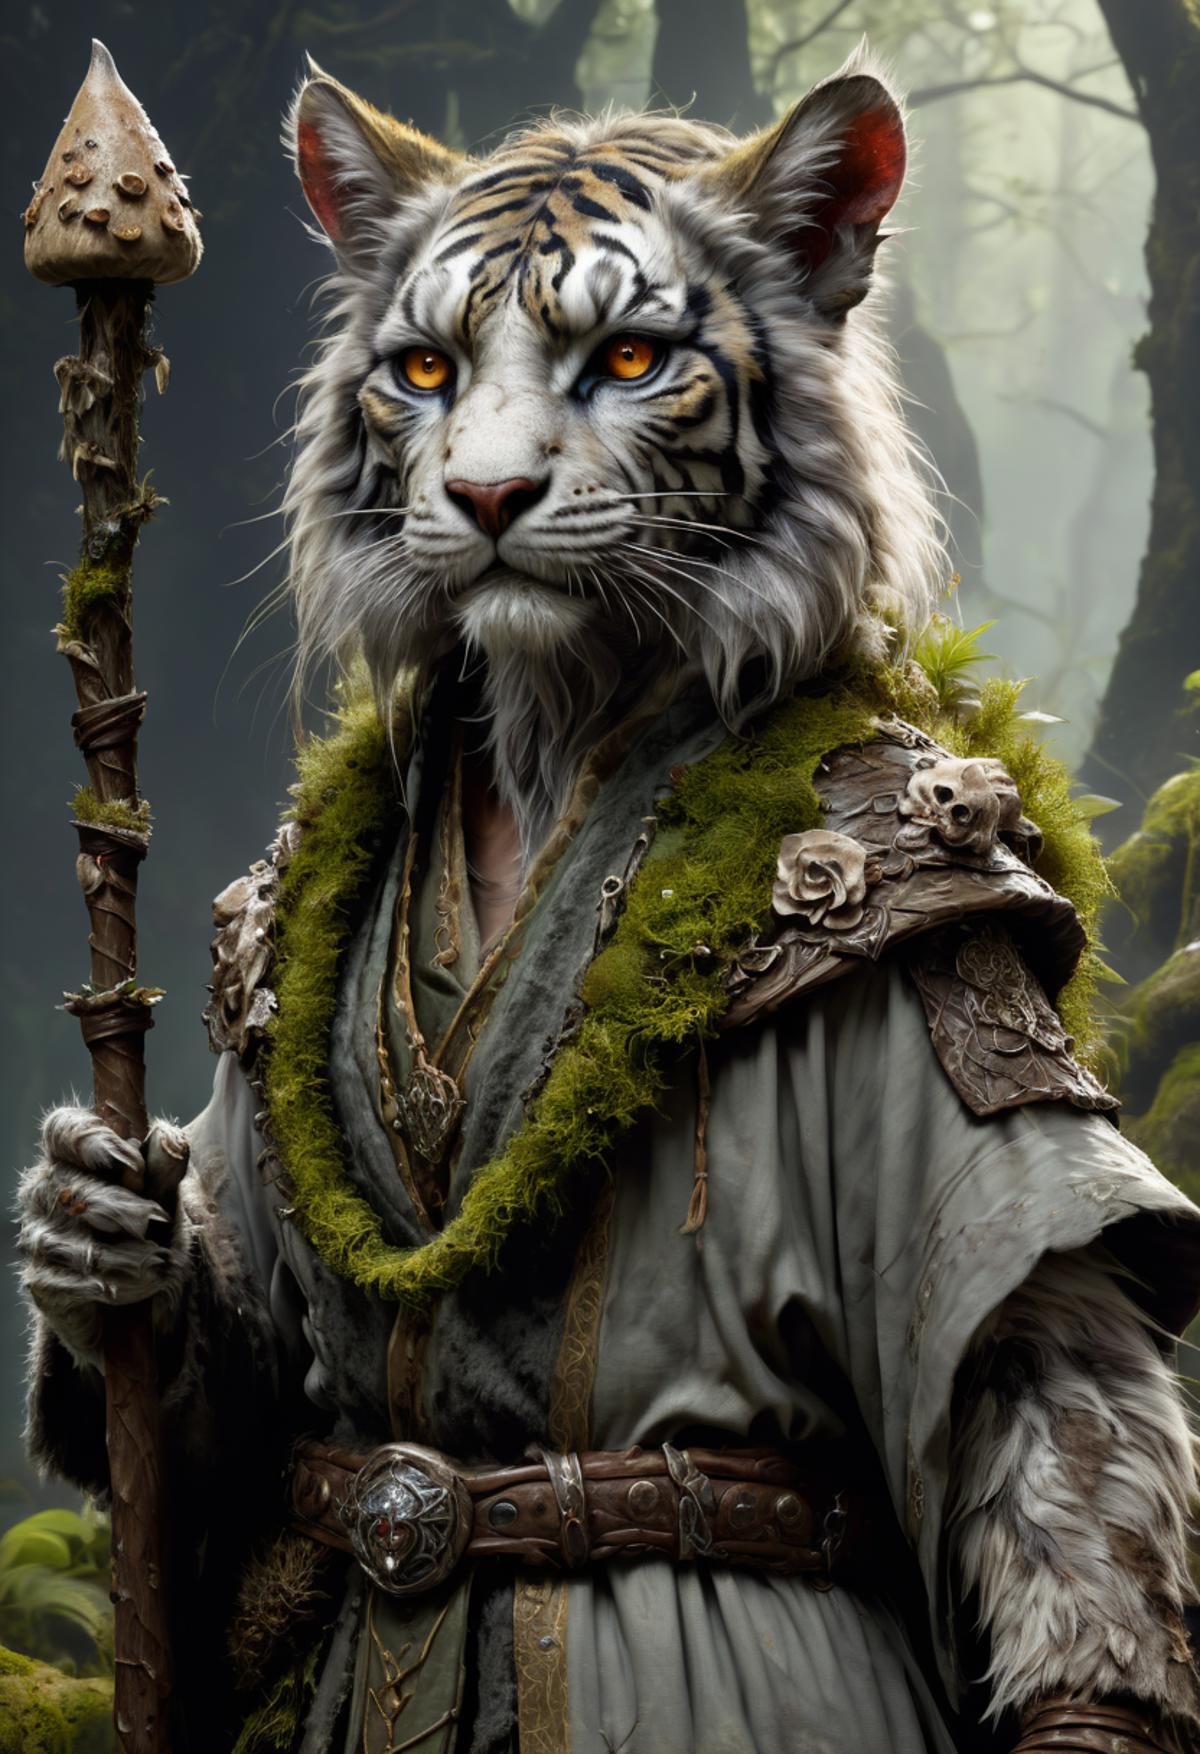 A tiger-like creature with yellow eyes and a green necklace.